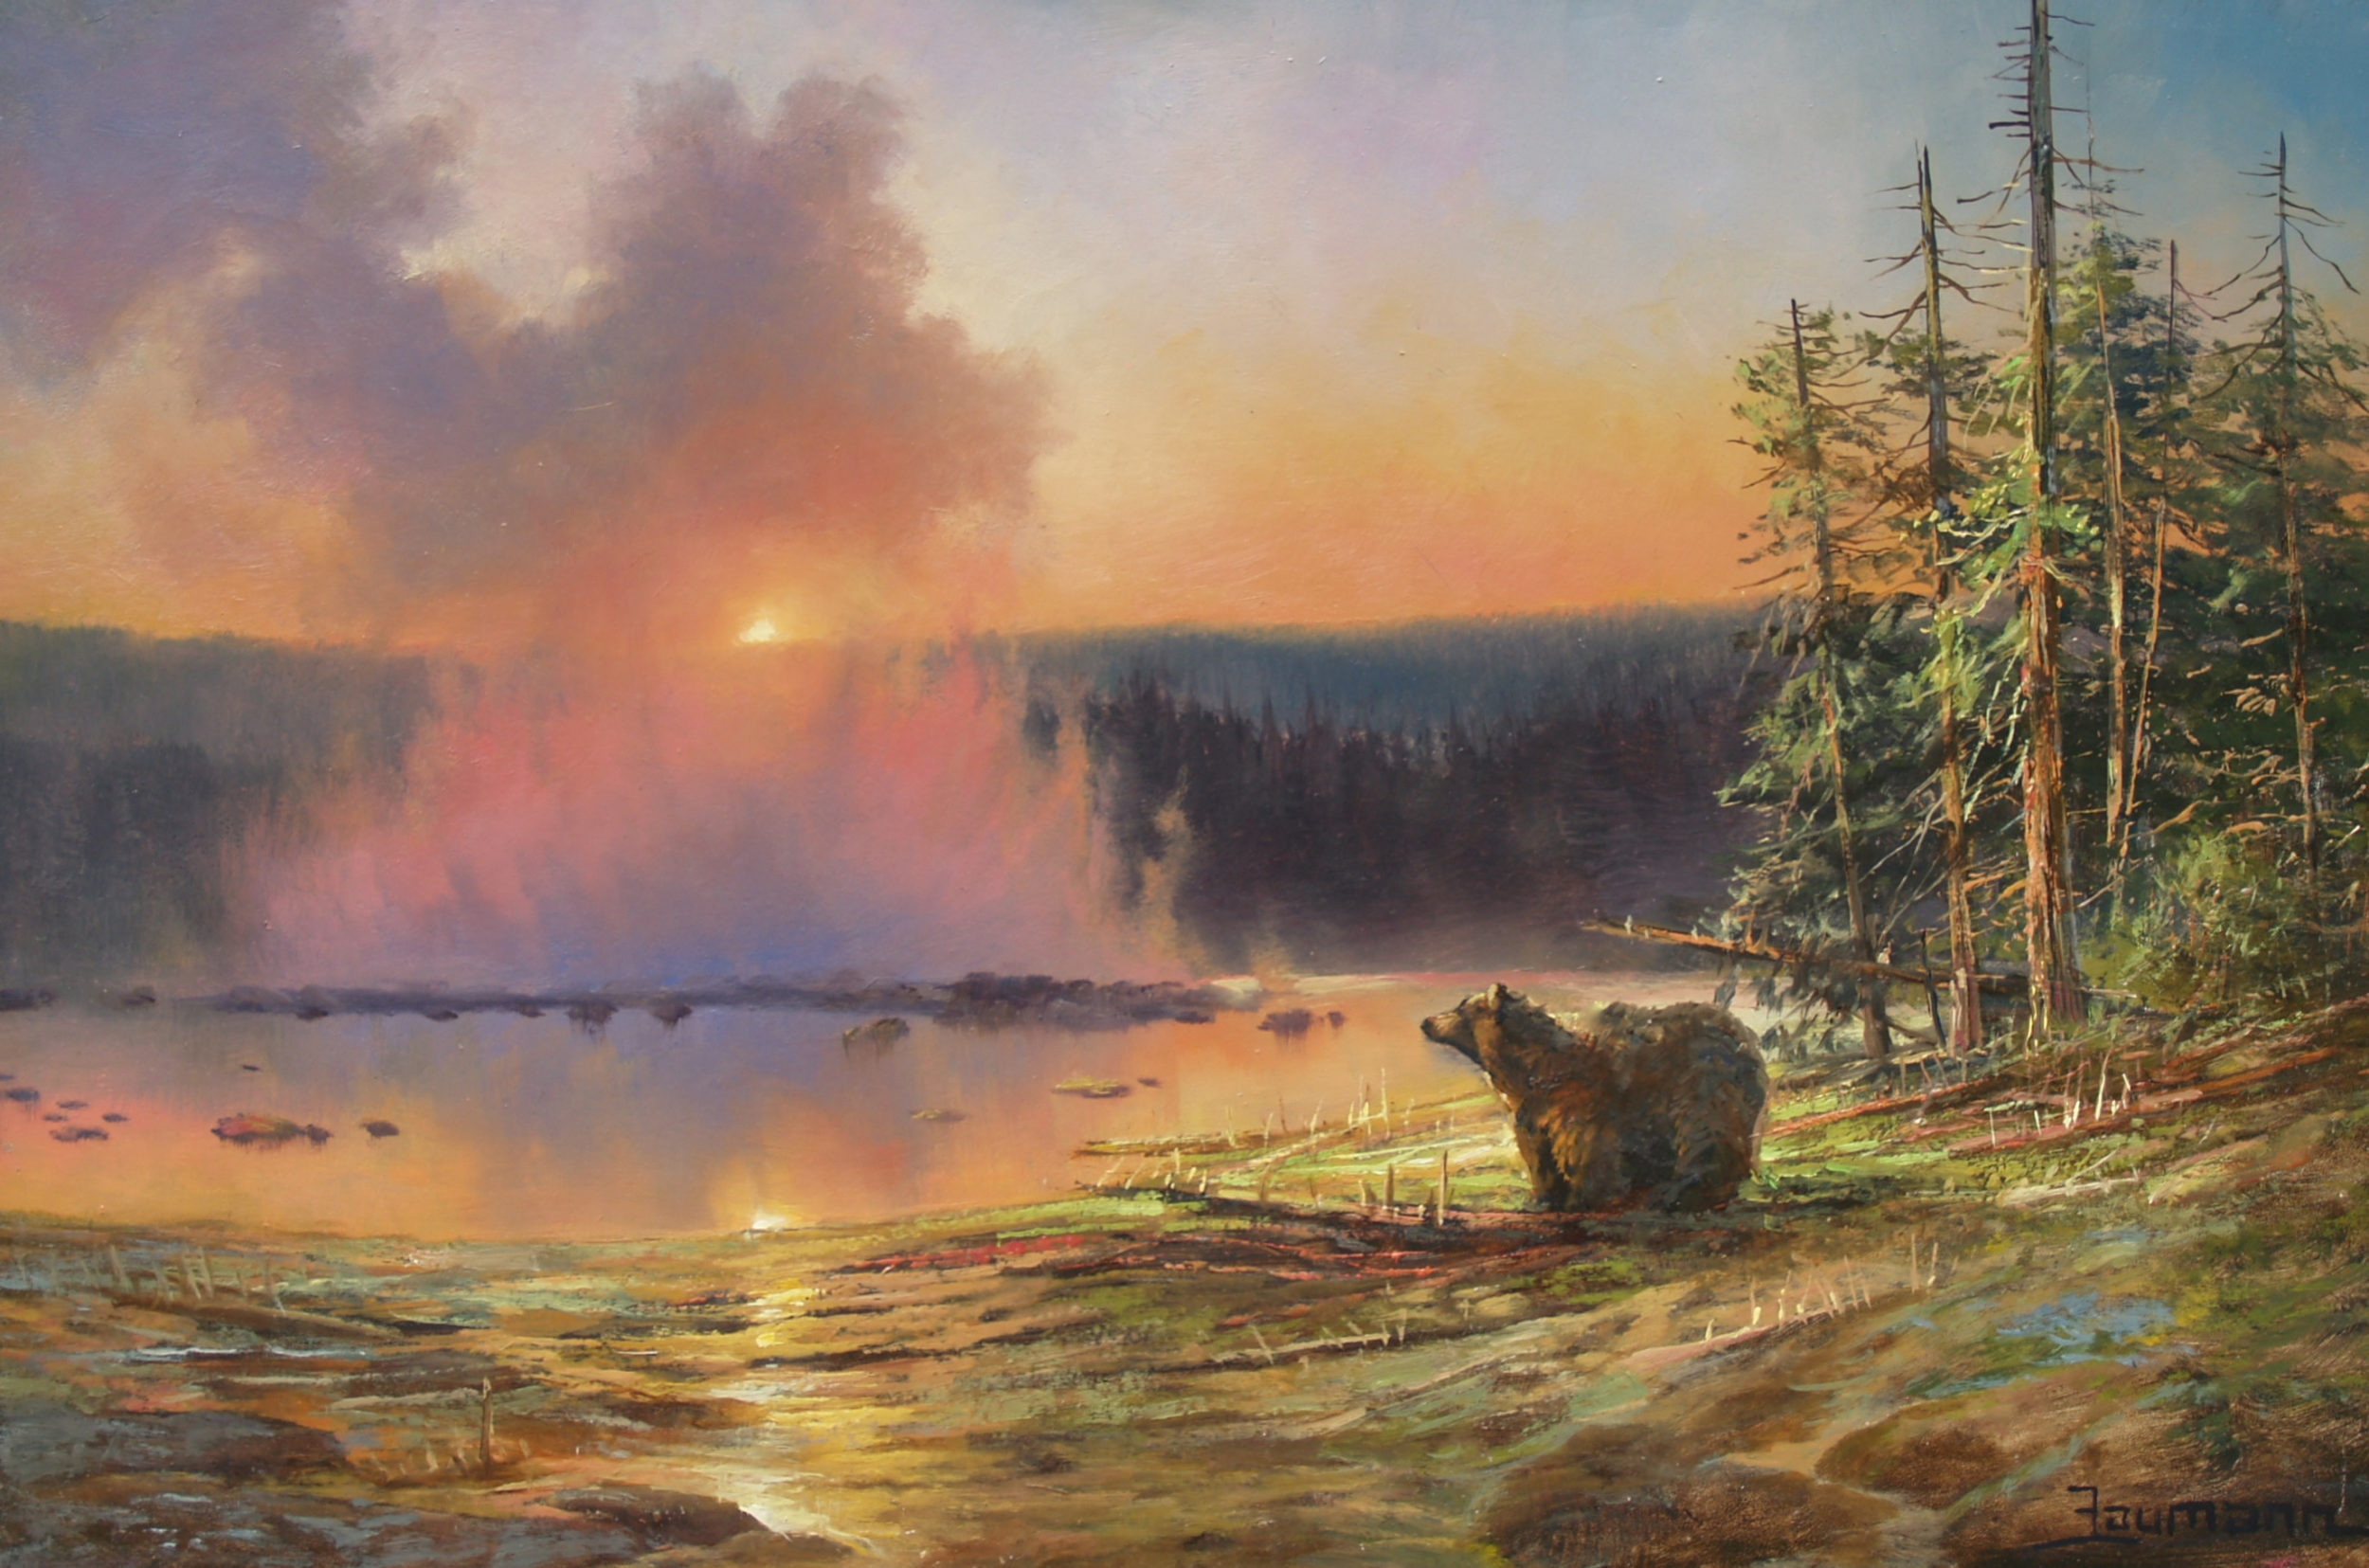 This is a sunset painting called Twilight at Upper Geyser Basin by Stefan Baumann painted in Yellowstone National Park.